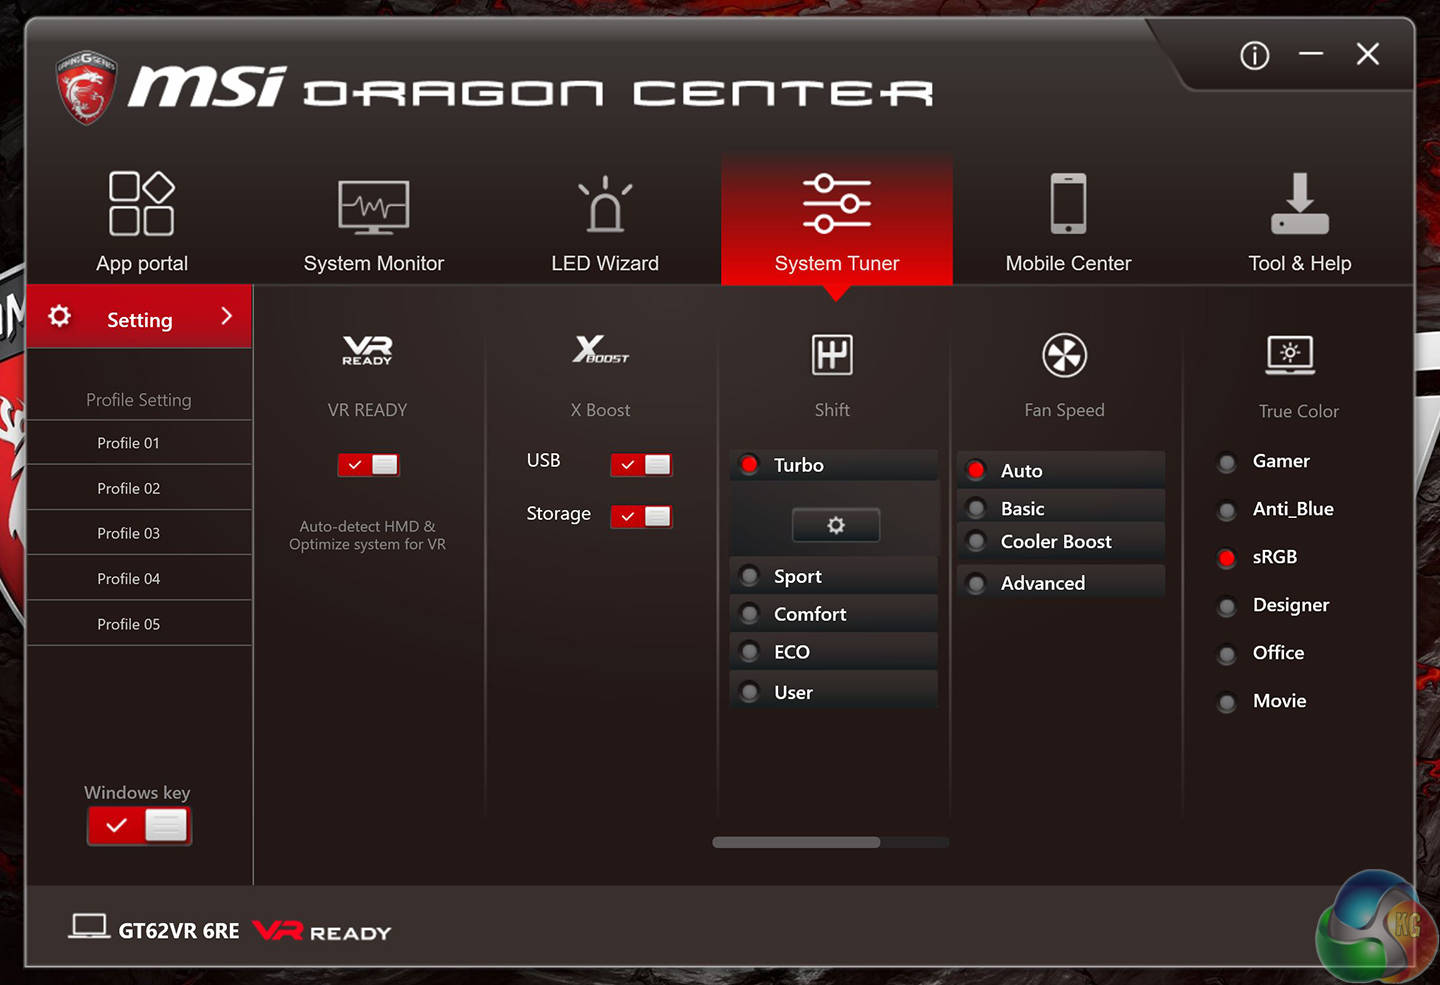 msi dragon center review